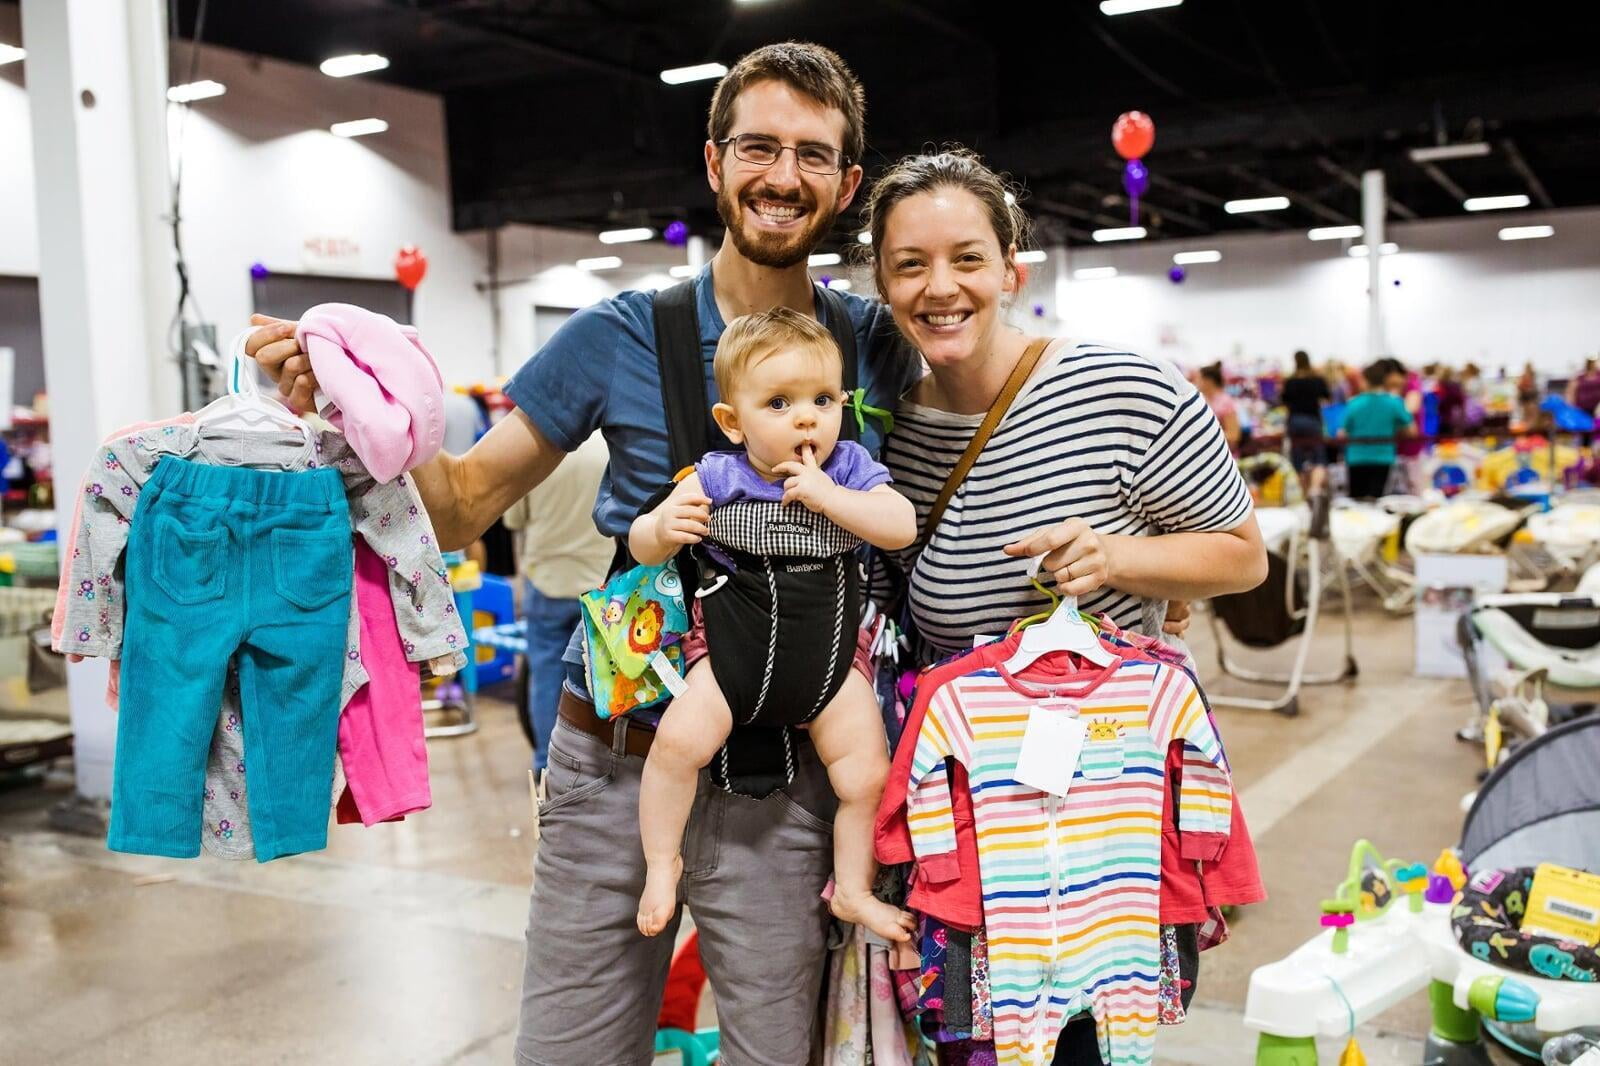 Young couple shopping with their baby.  Dad has daughter in a front pack carrier and is holding up girl's clothing.  Mother is also holding girl's clothing.